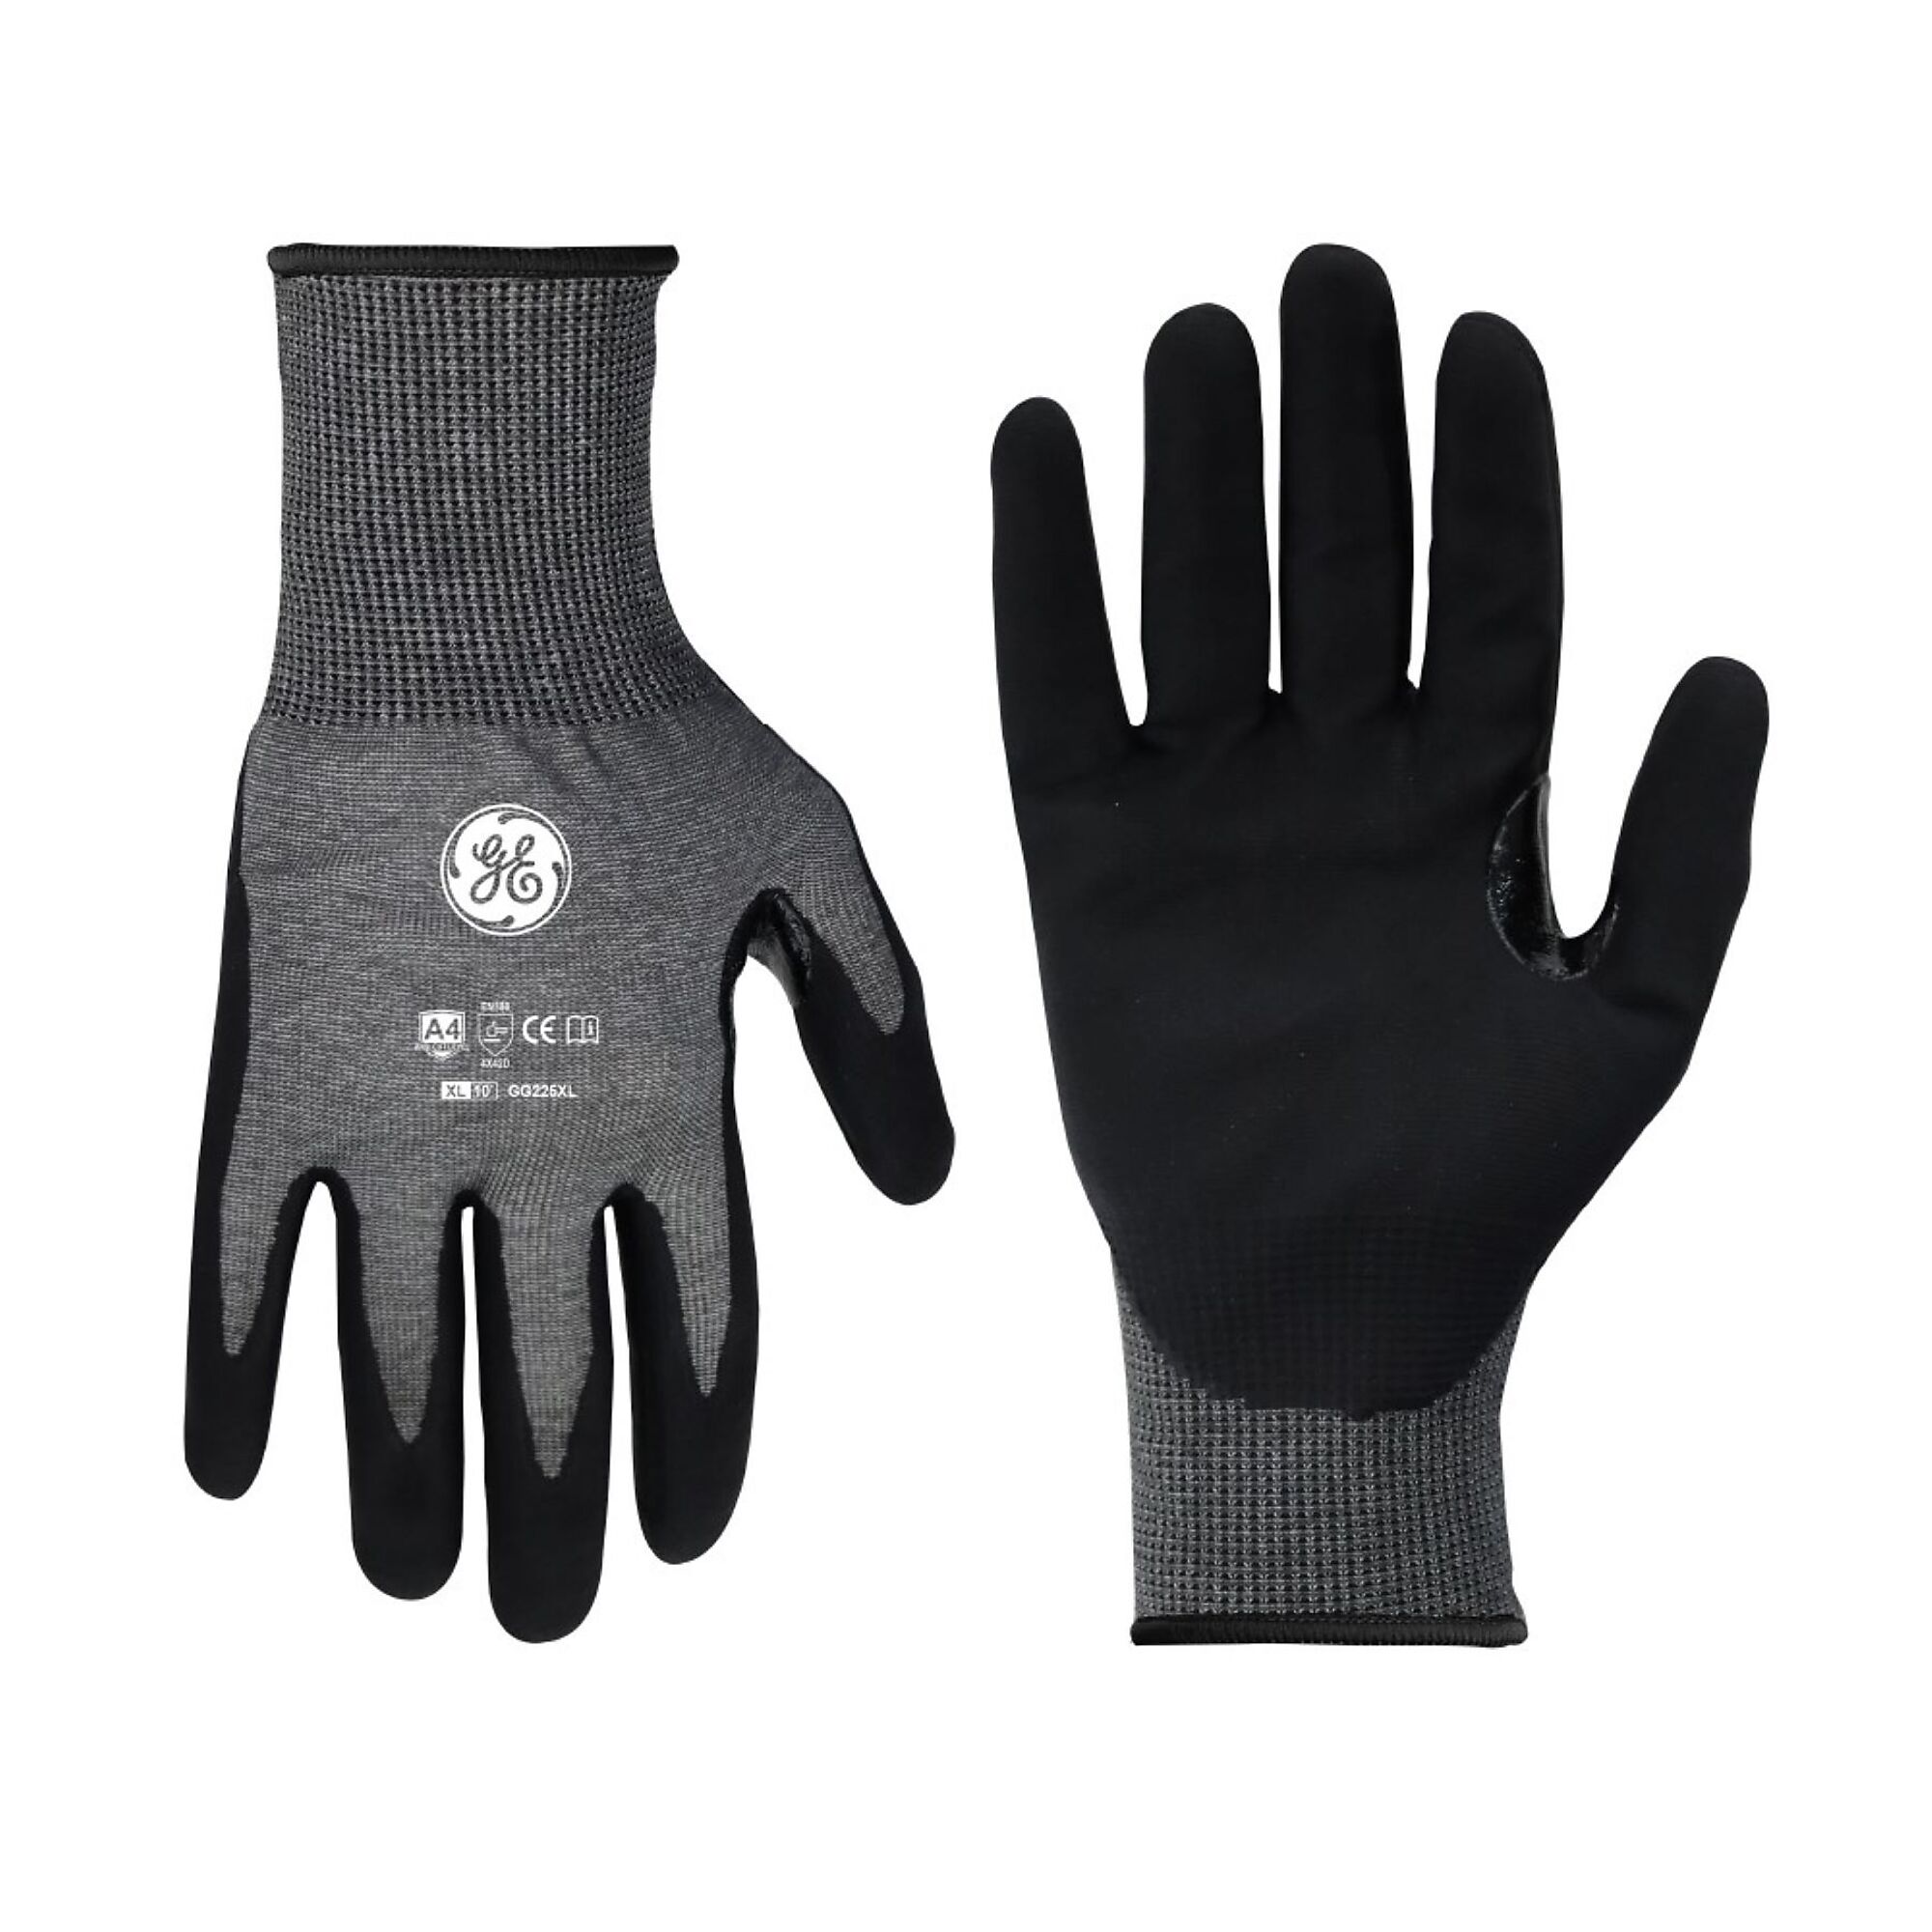 General Electric, Unisex Dipped Gloves Black/Blue XL 1 pair, Size XL, Included (qty.) 1, Model GG225XLC